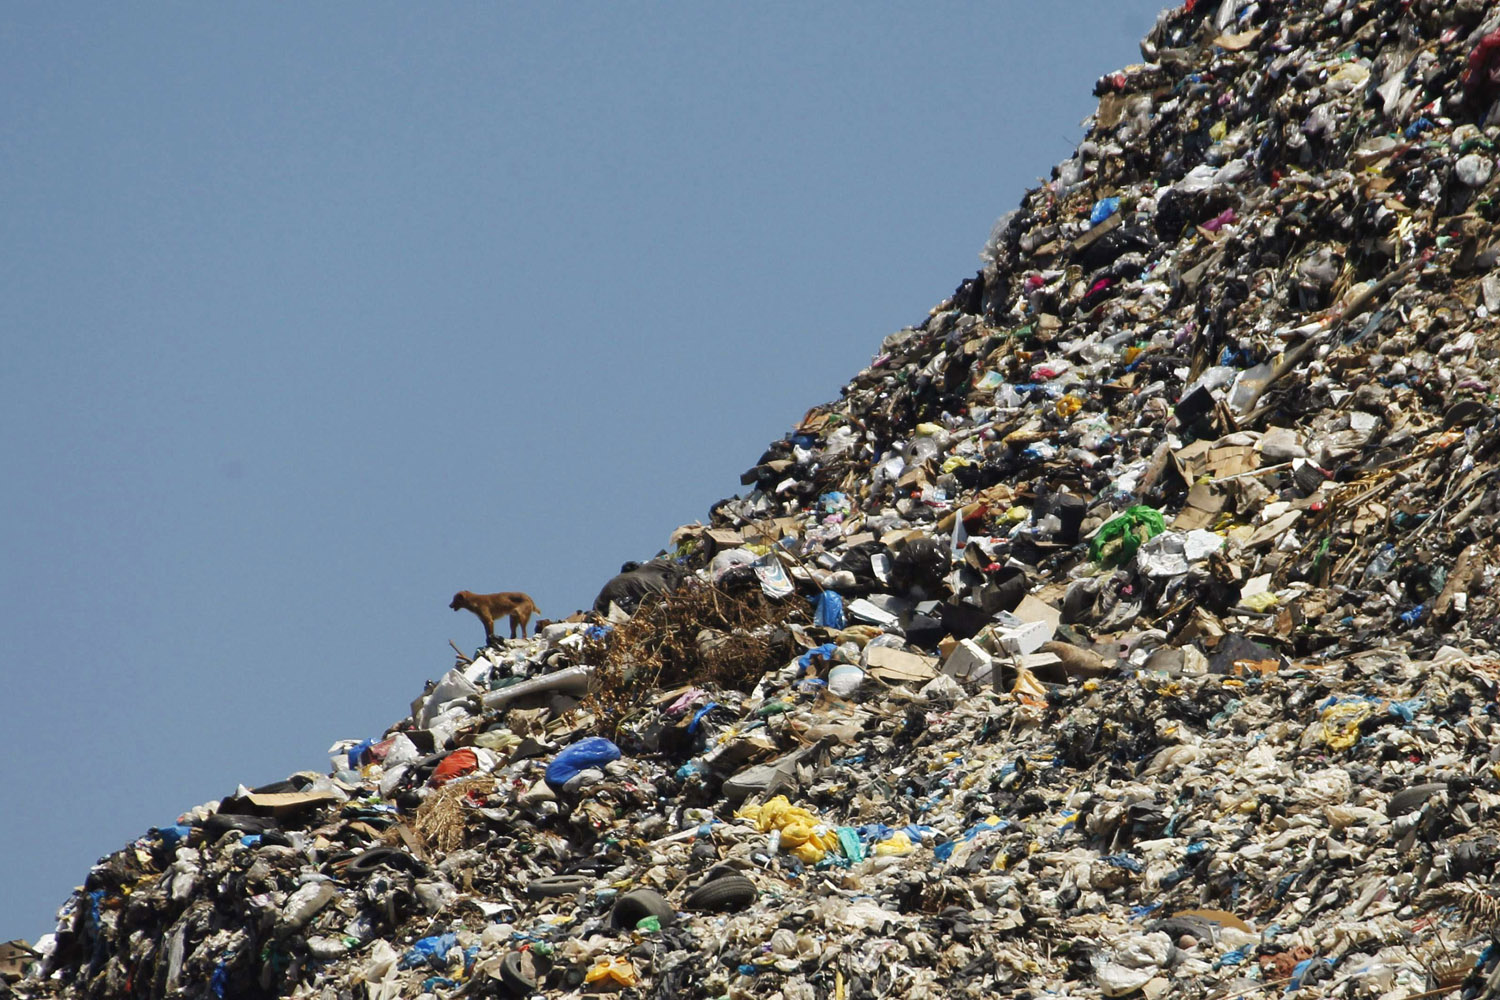 June 9, 2012. A stray dog stands on a rubbish dump at the seafront in Sidon, southern Lebanon. The dump, located near schools, hospitals and apartment blocks in Lebanon's third biggest city, has partially collapsed into the Mediterranean sea several times.